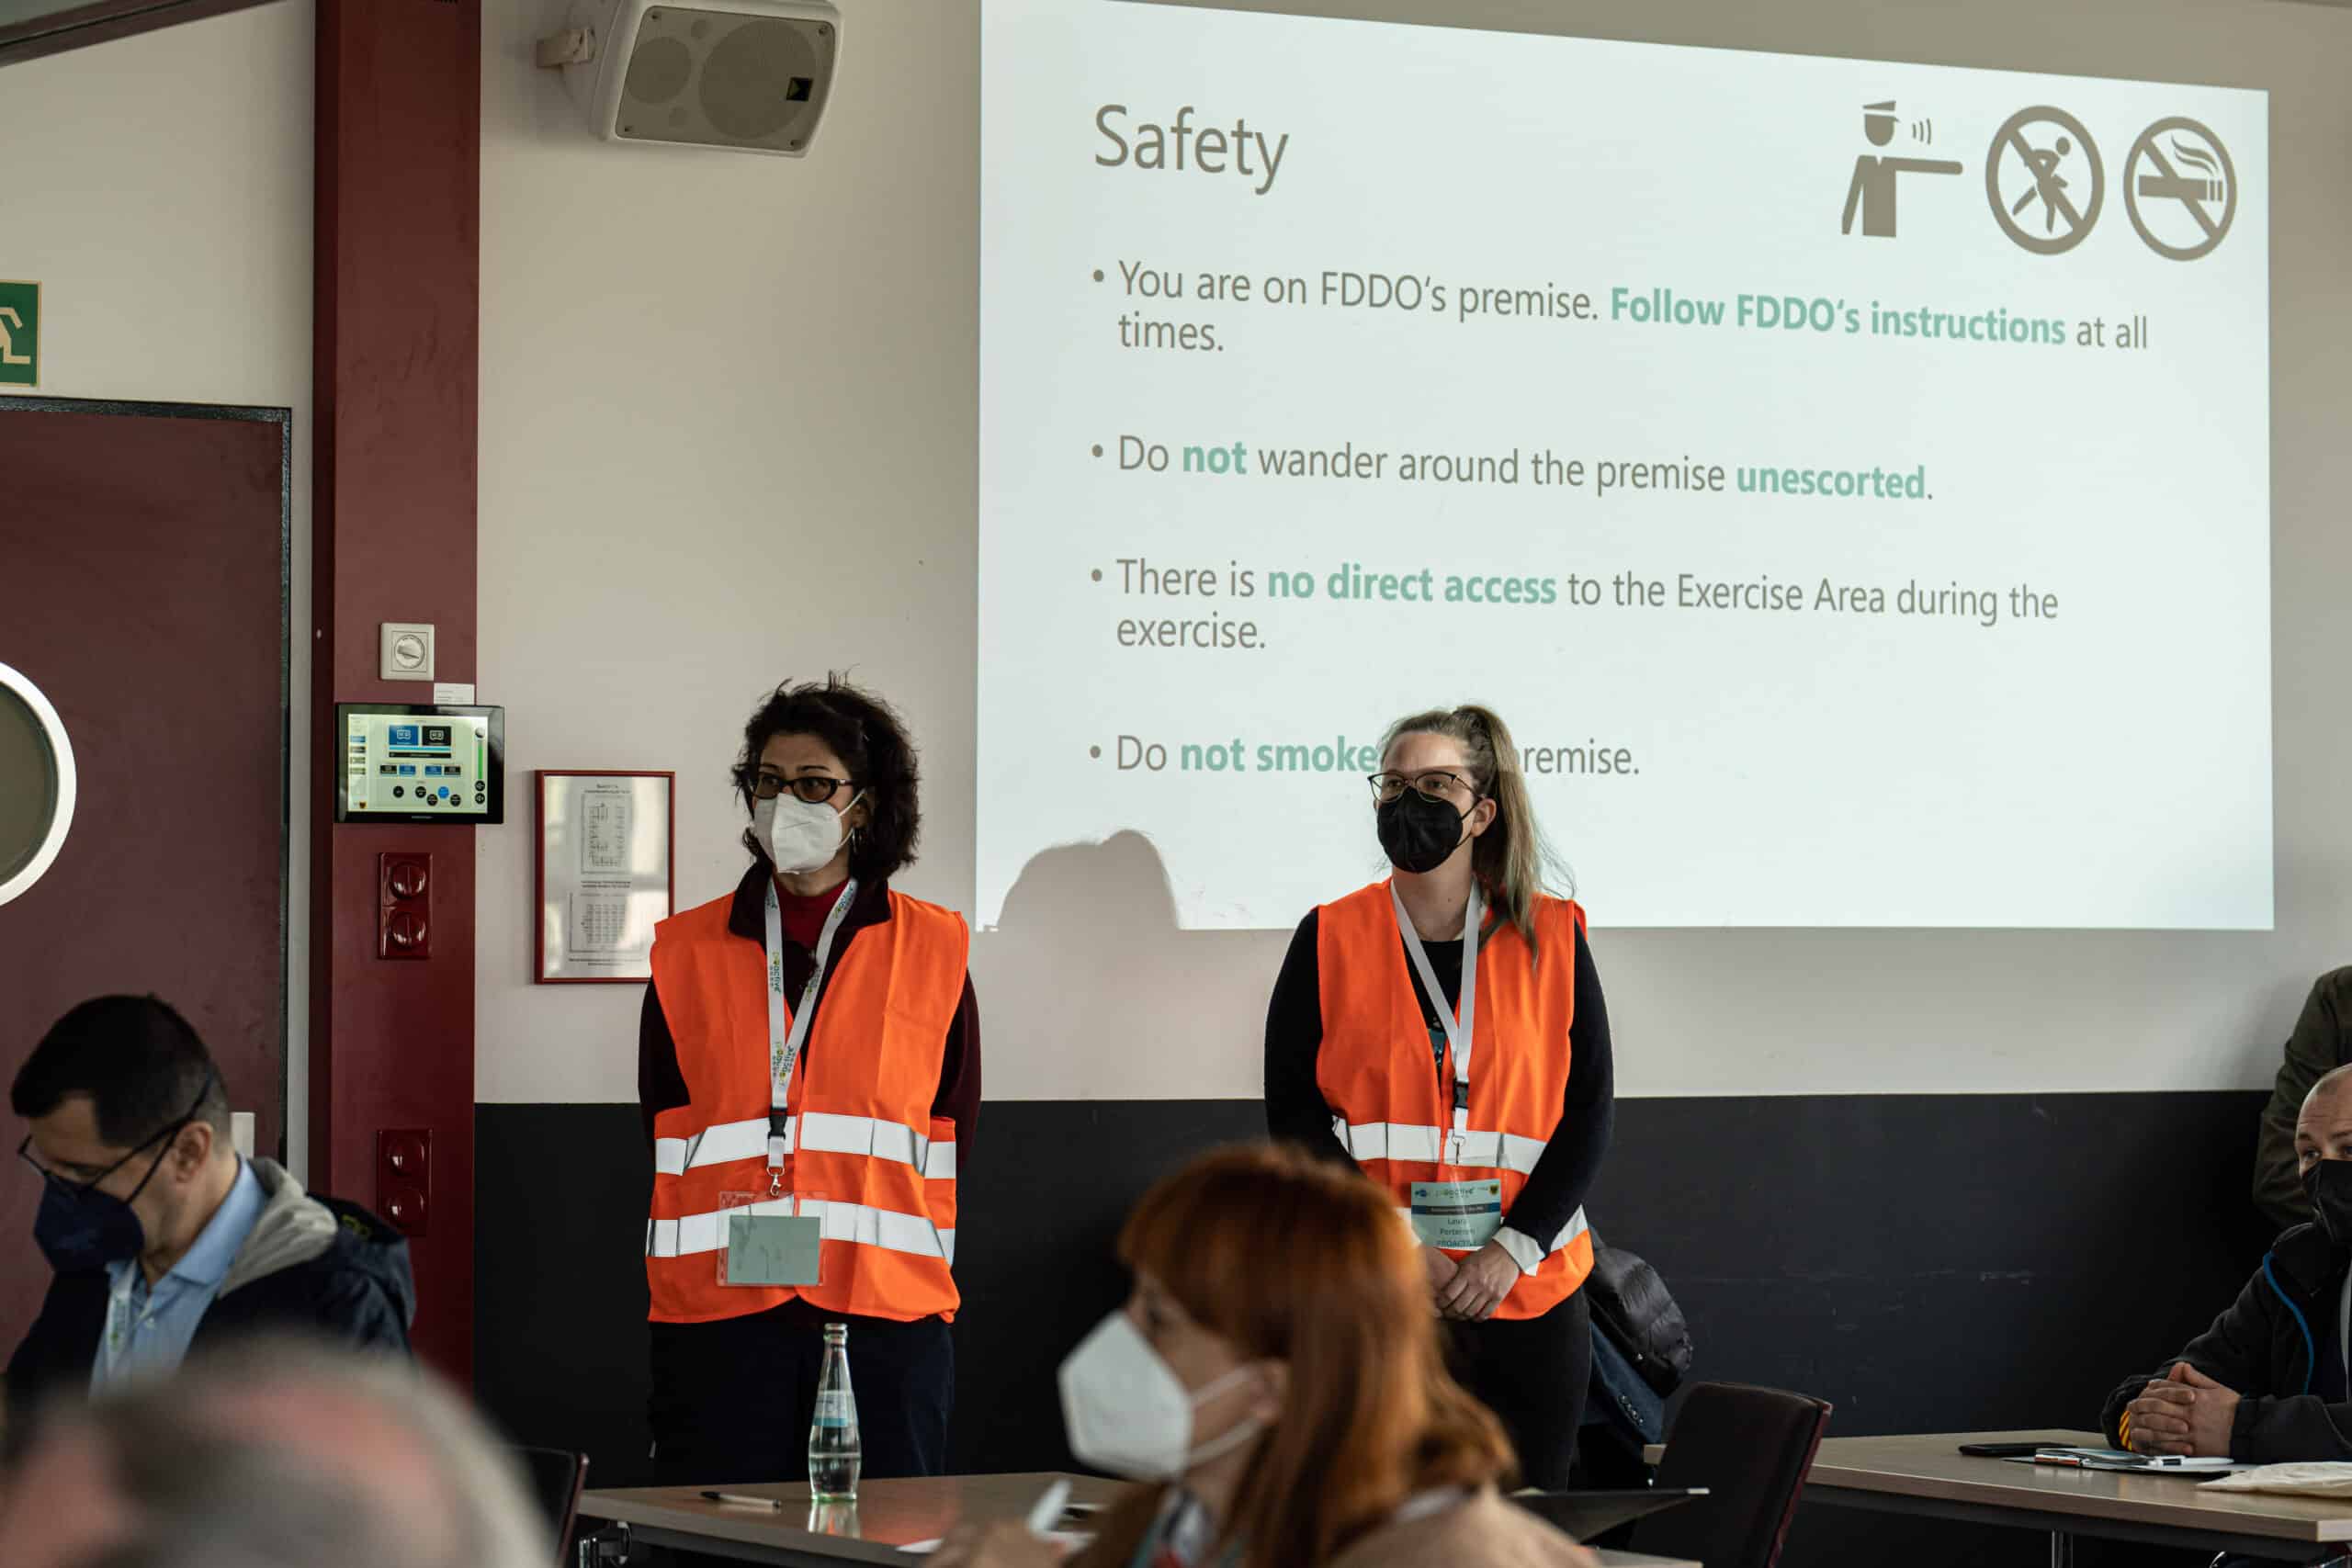 Two female PROACTIVE staff wearing a orange waistcoat are standing in front of the screen where safety instructions are written.